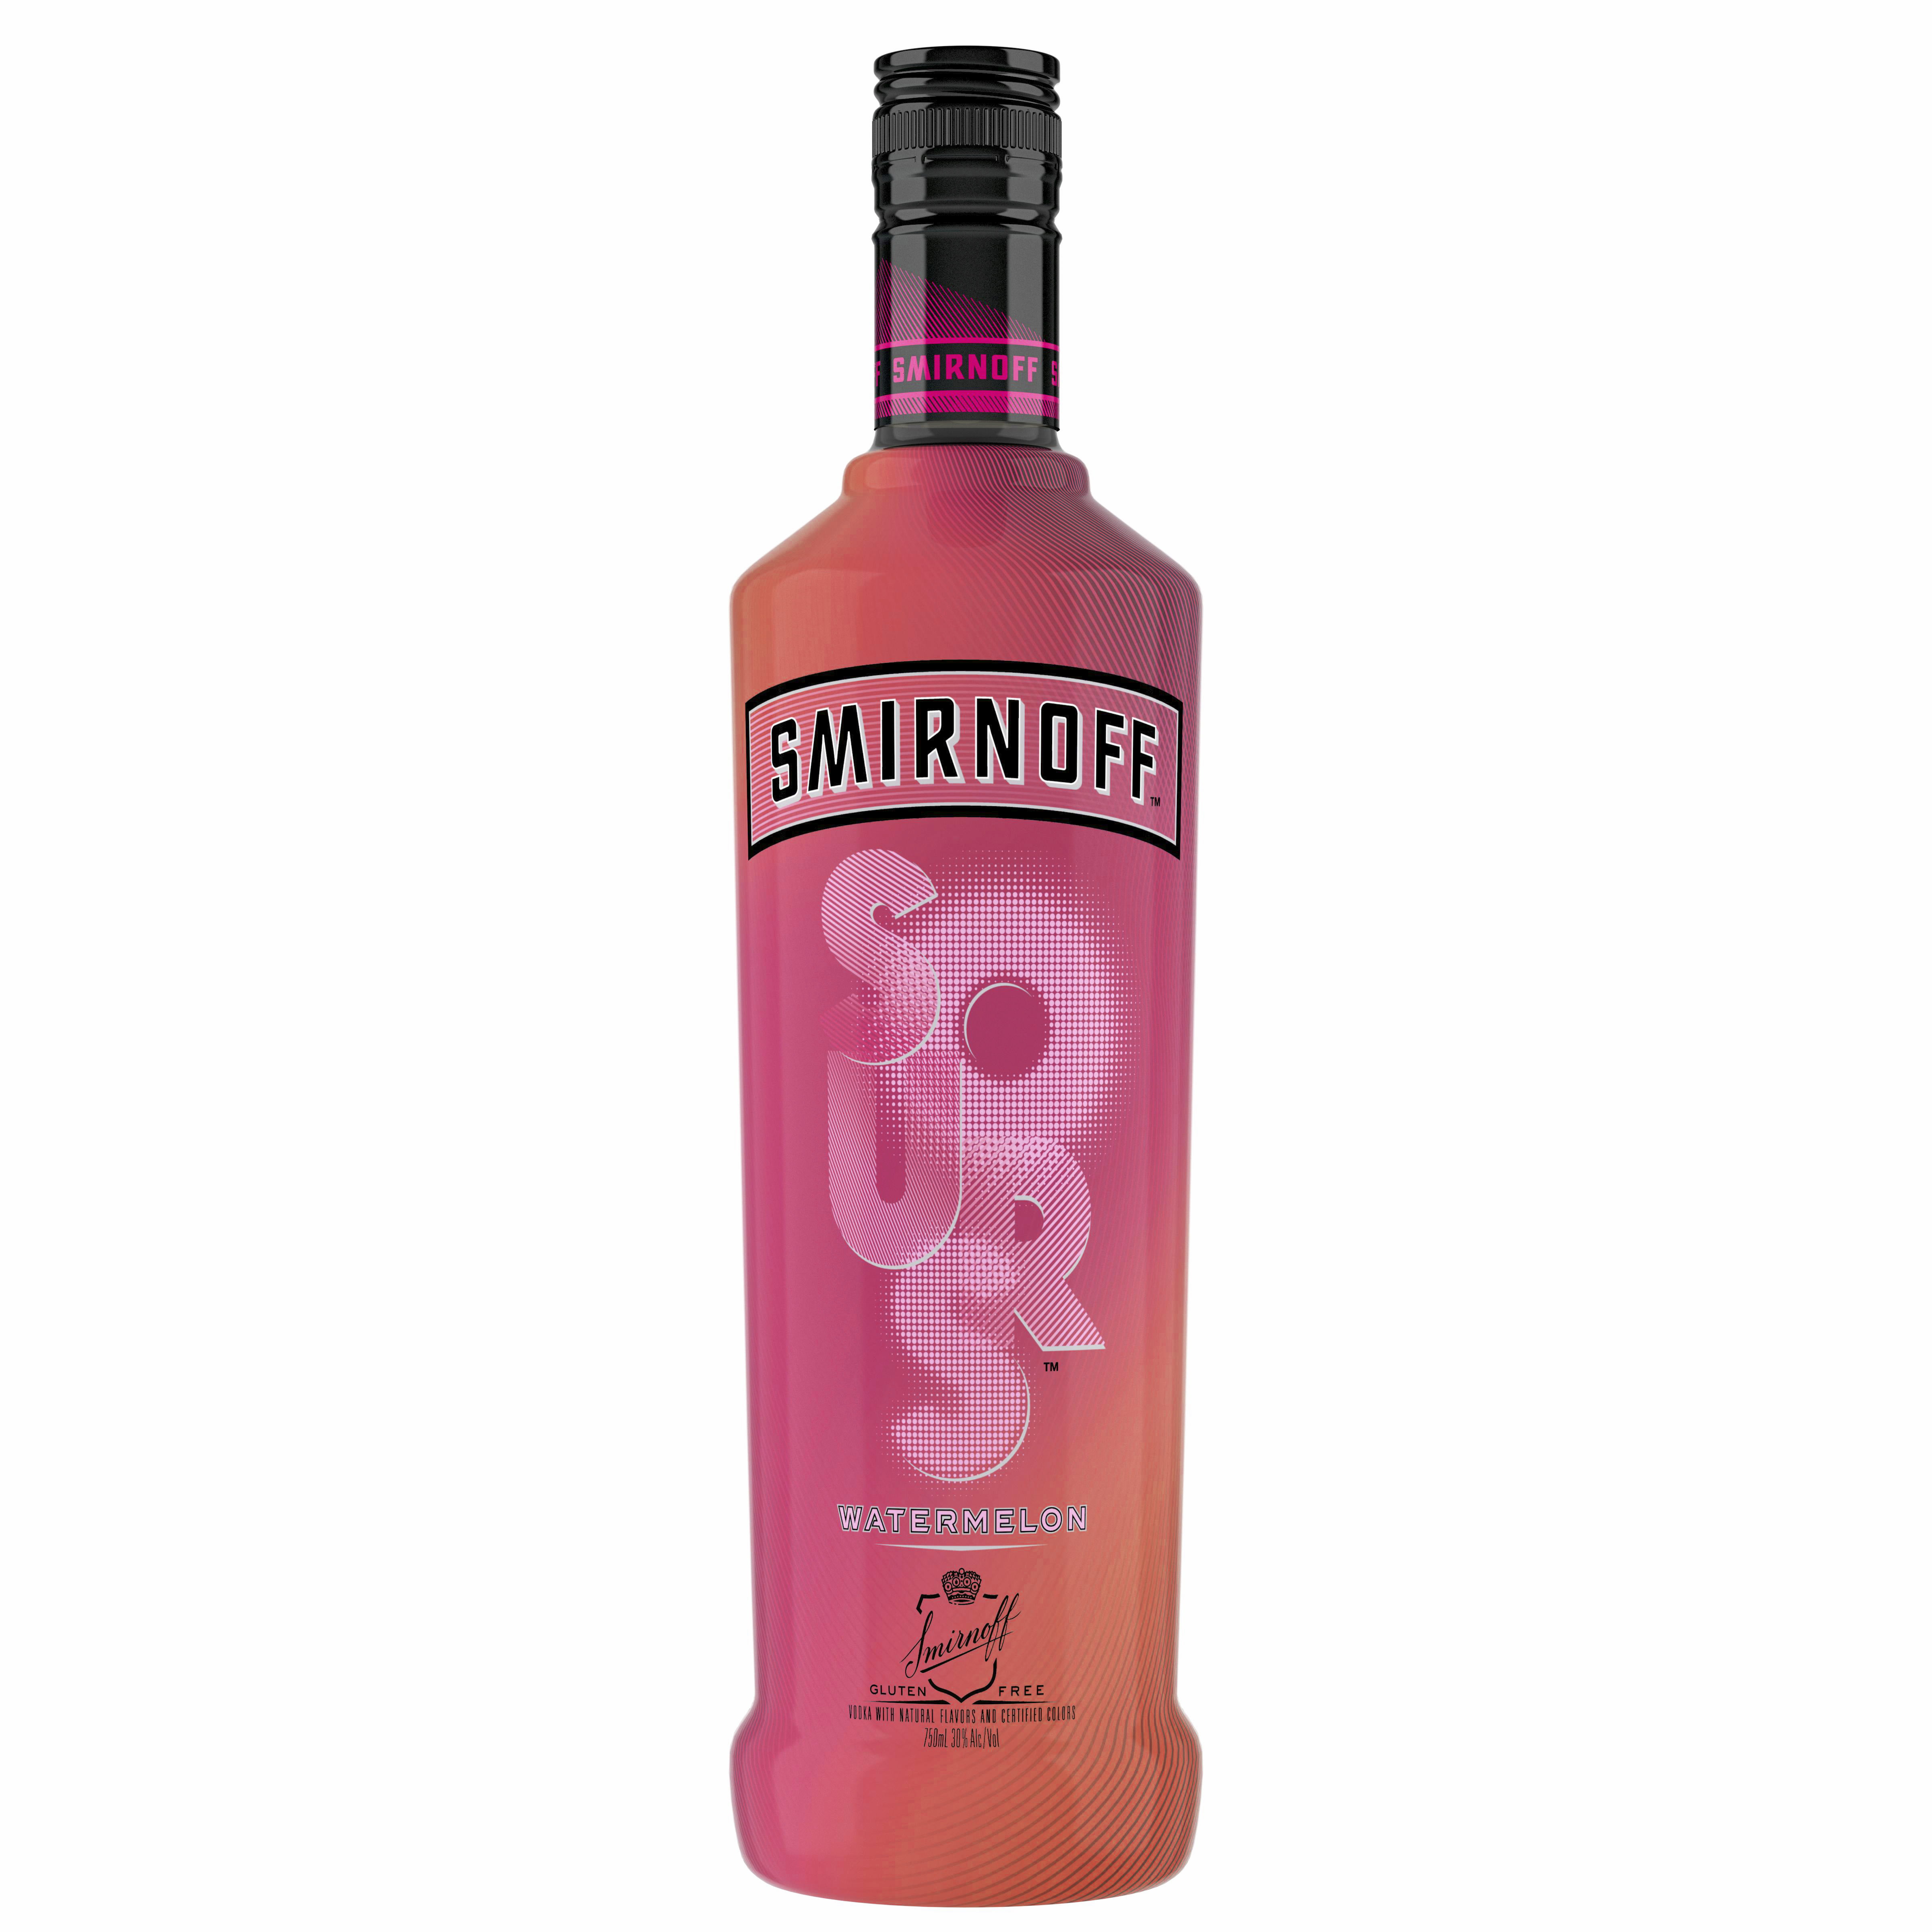 smirnoff-sours-watermelon-60-proof-vodka-infused-with-natural-flavors